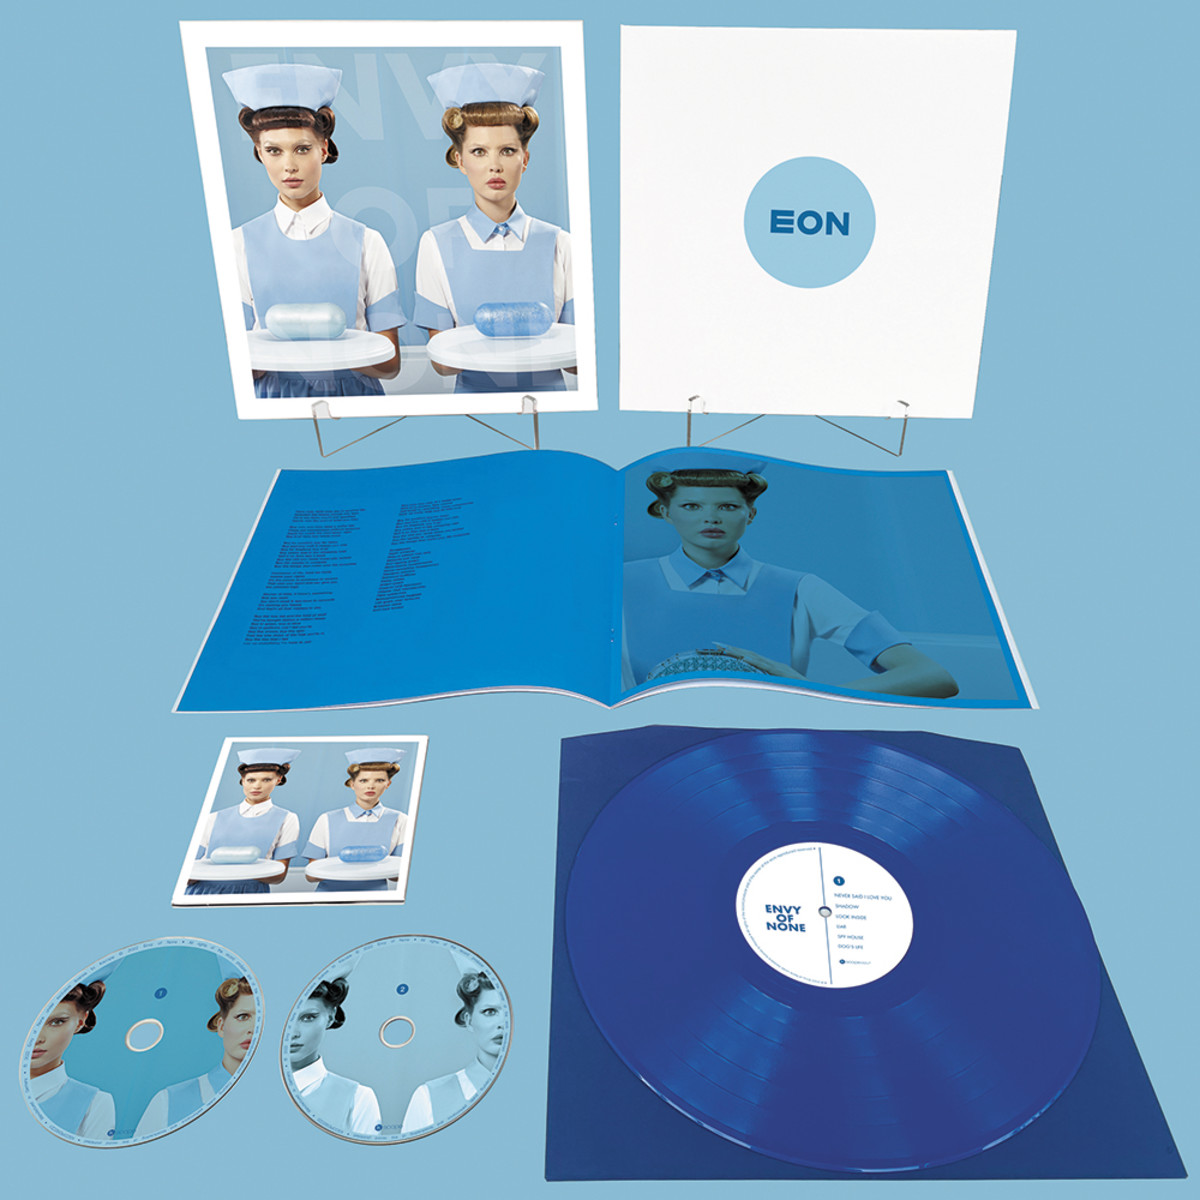 A limited-edition box set of Envy of None’s debut album. The set contains two CDs, a blue vinyl record, a booklet and bonus tracks.